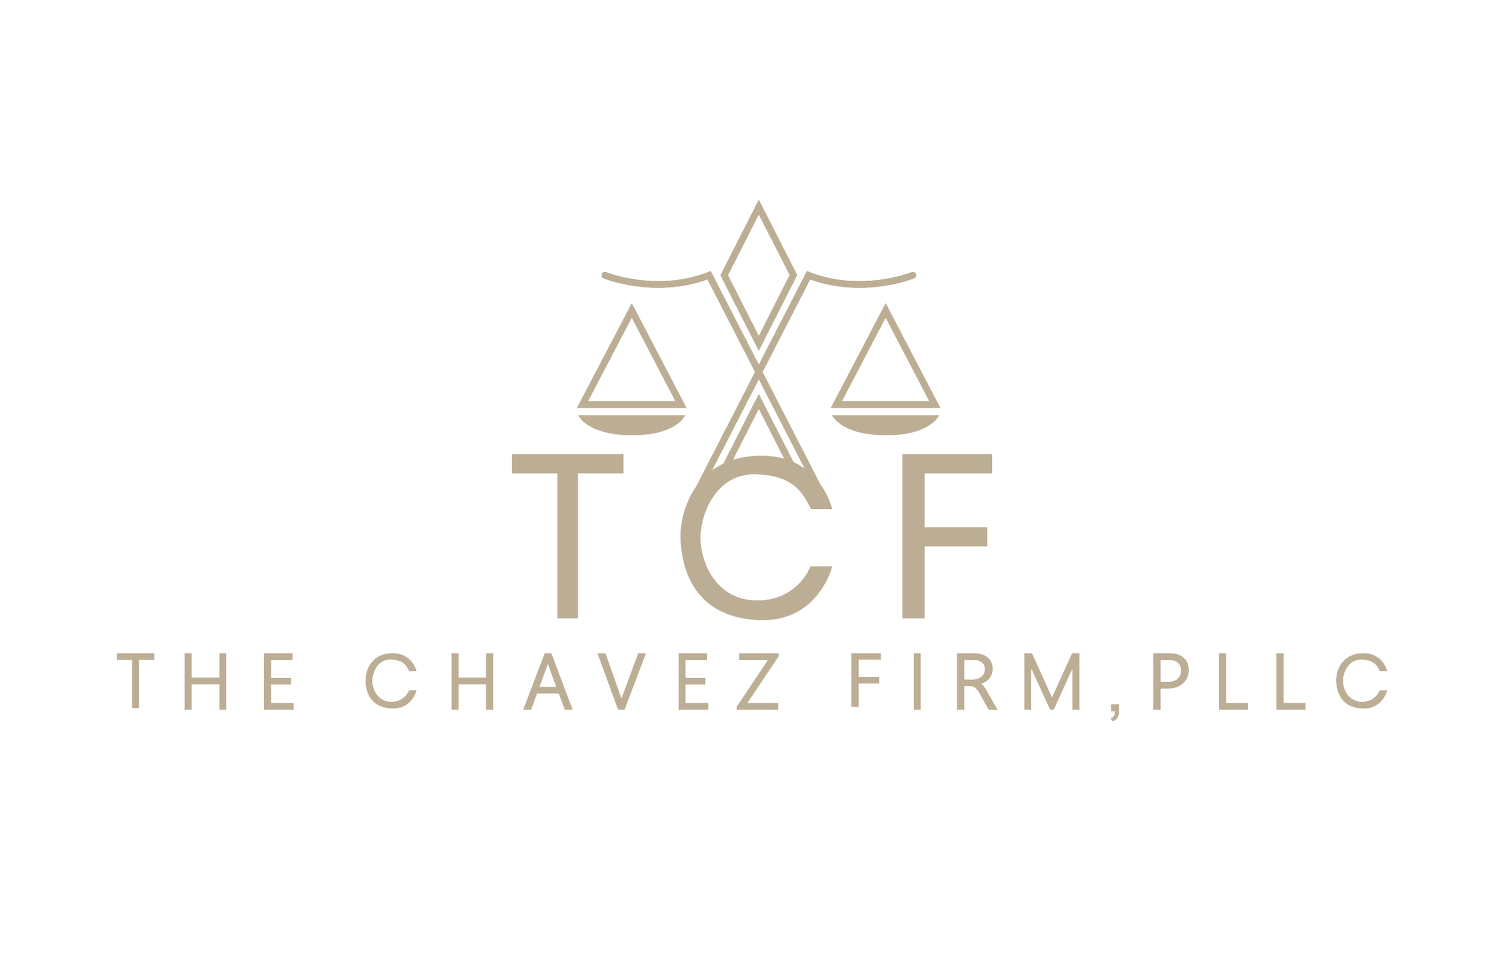 THE CHAVEZ FIRM, PLLC